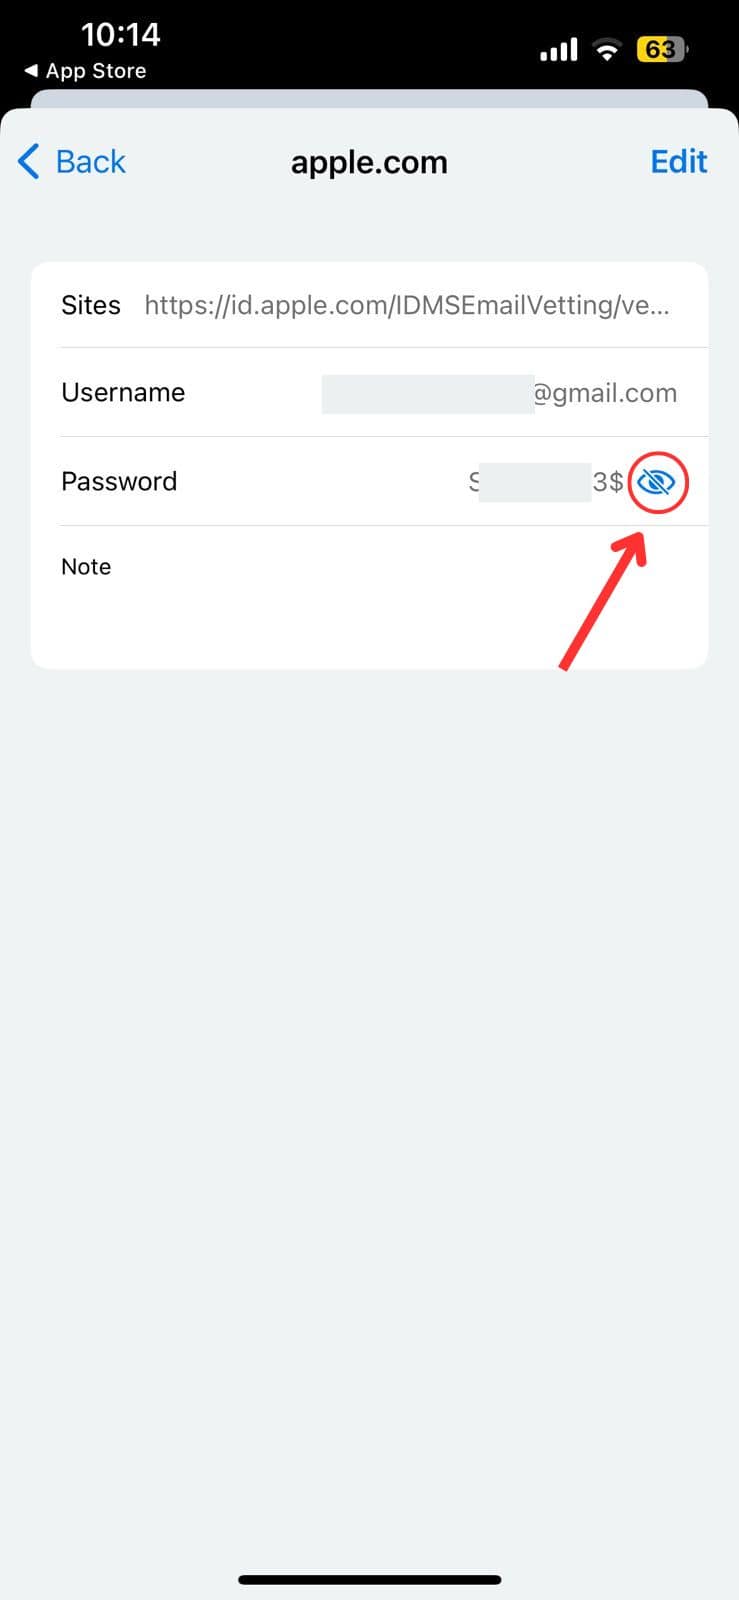 Tap on eye button to reveal password